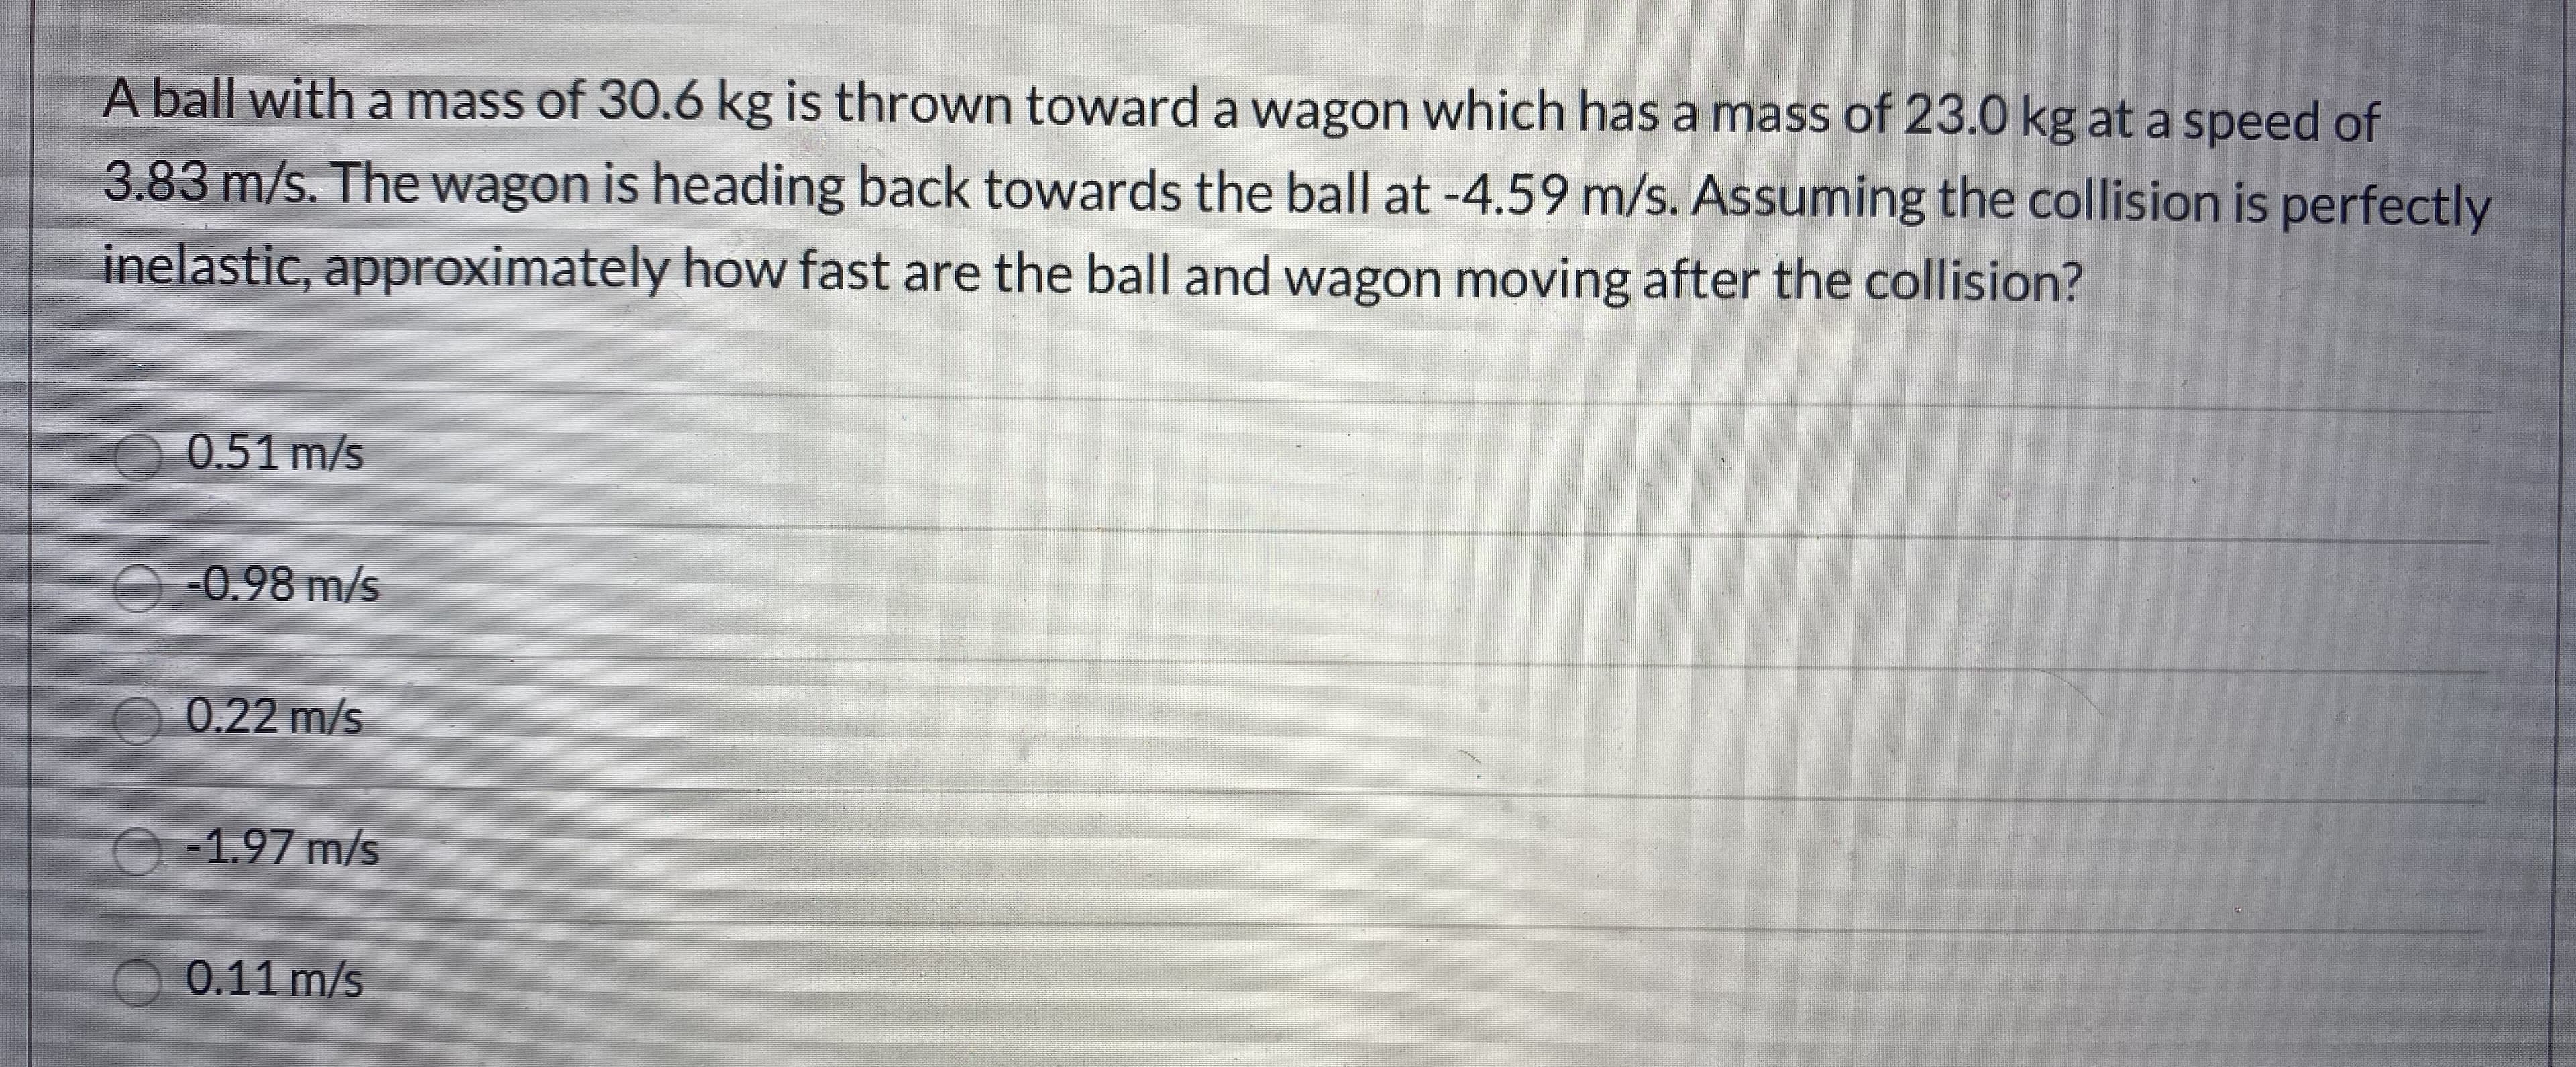 A ball with a mass of 30.6 kg is thrown toward a wagon which has a mass of 23.0 kg at a speed of
3.83 m/s. The wagon is heading back towards the ball at -4.59 m/s. Assuming the collision is perfectly
